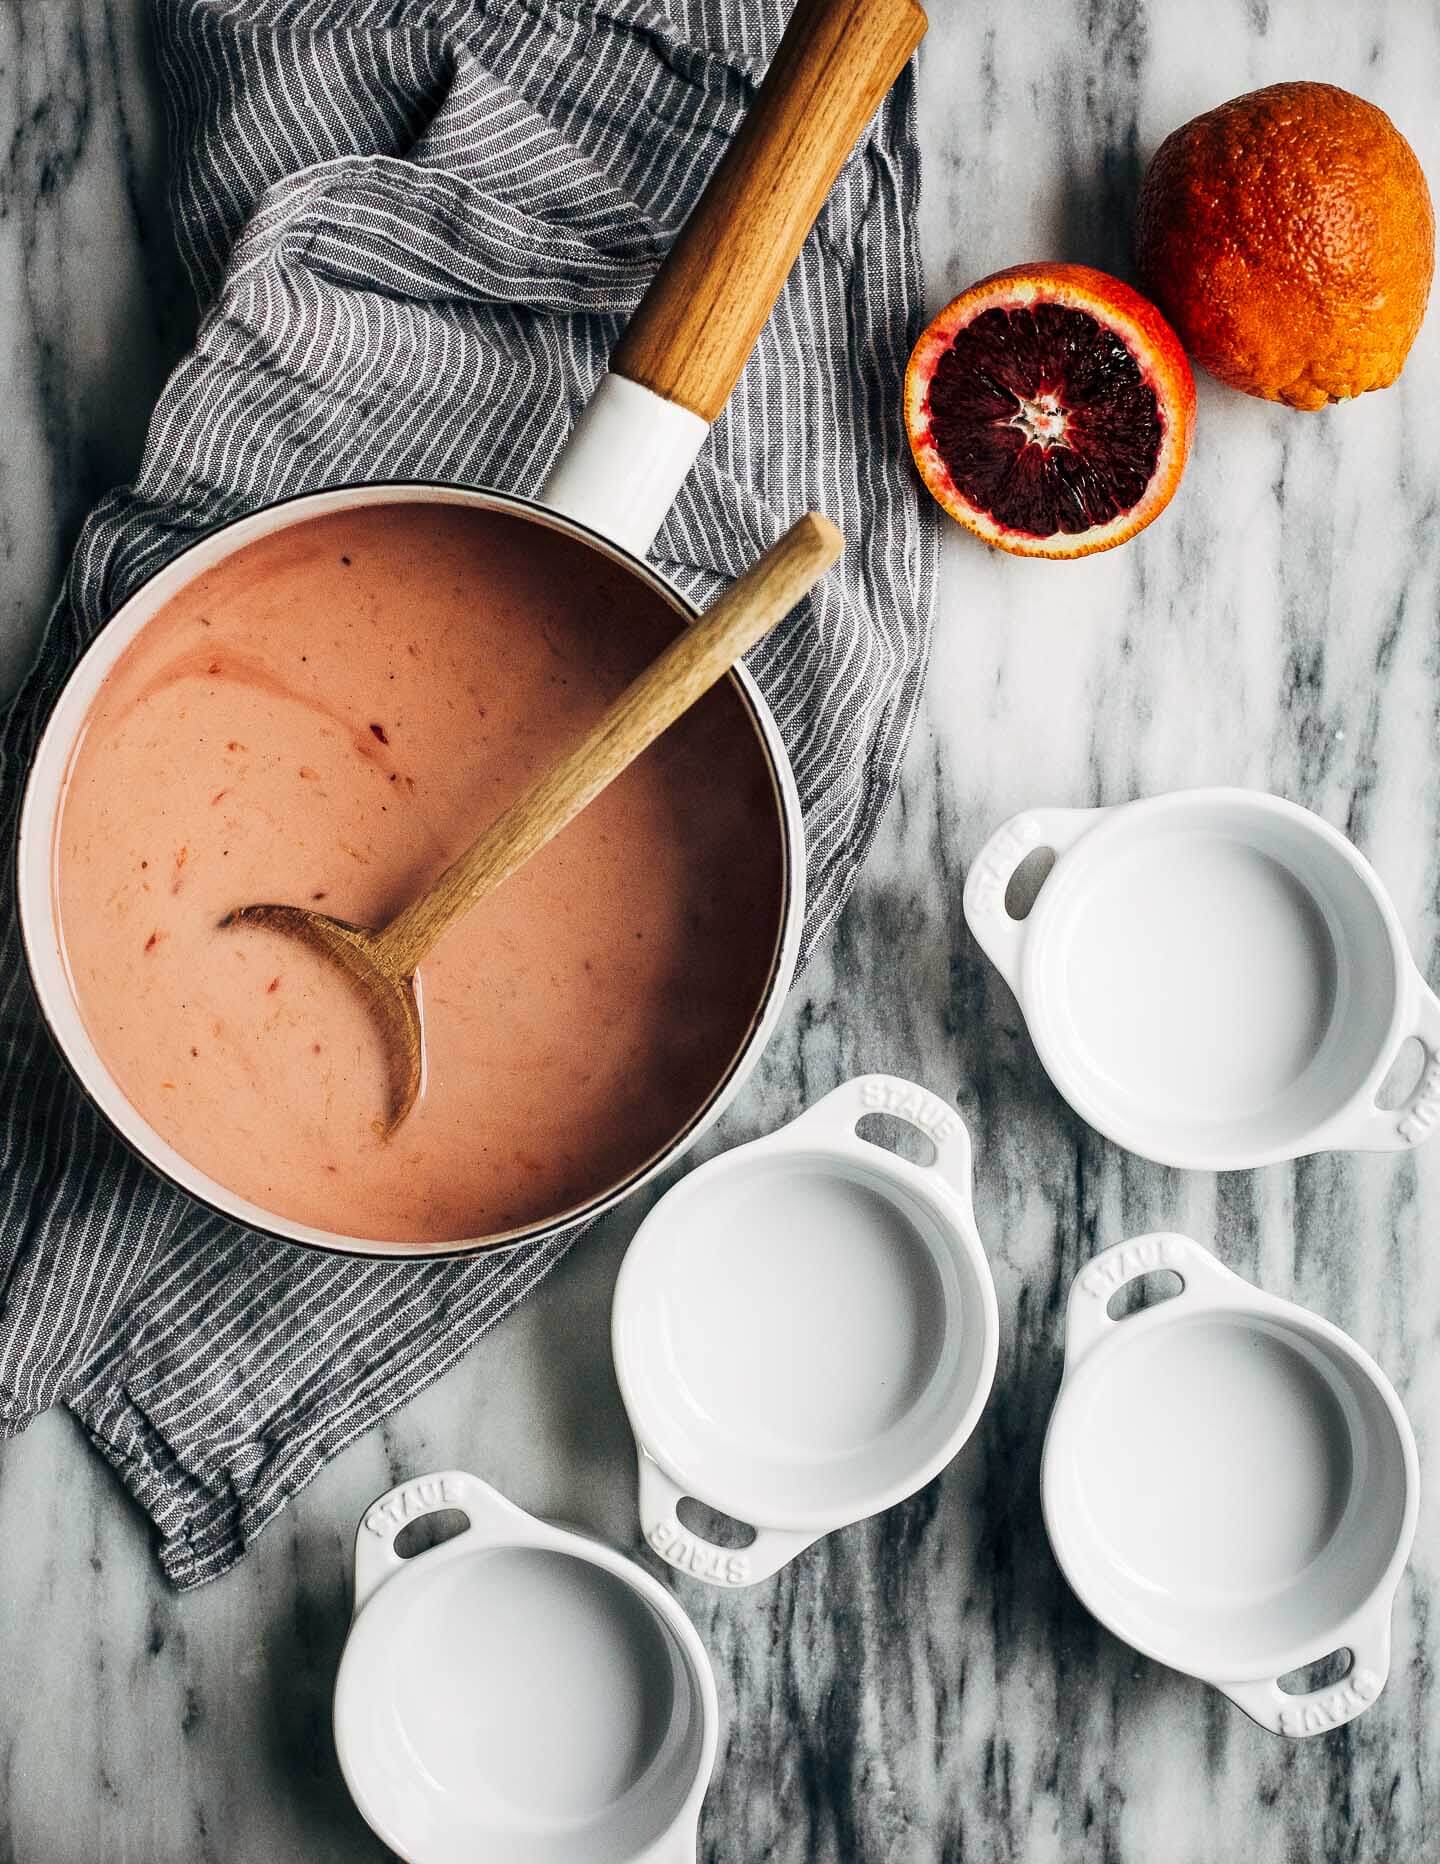 This creamy vegan blood orange panna cotta has a coconut milk base suffused with vanilla bean and clove, and a swirl with ruby-hued blood orange juice on top. Share it with someone you love. 